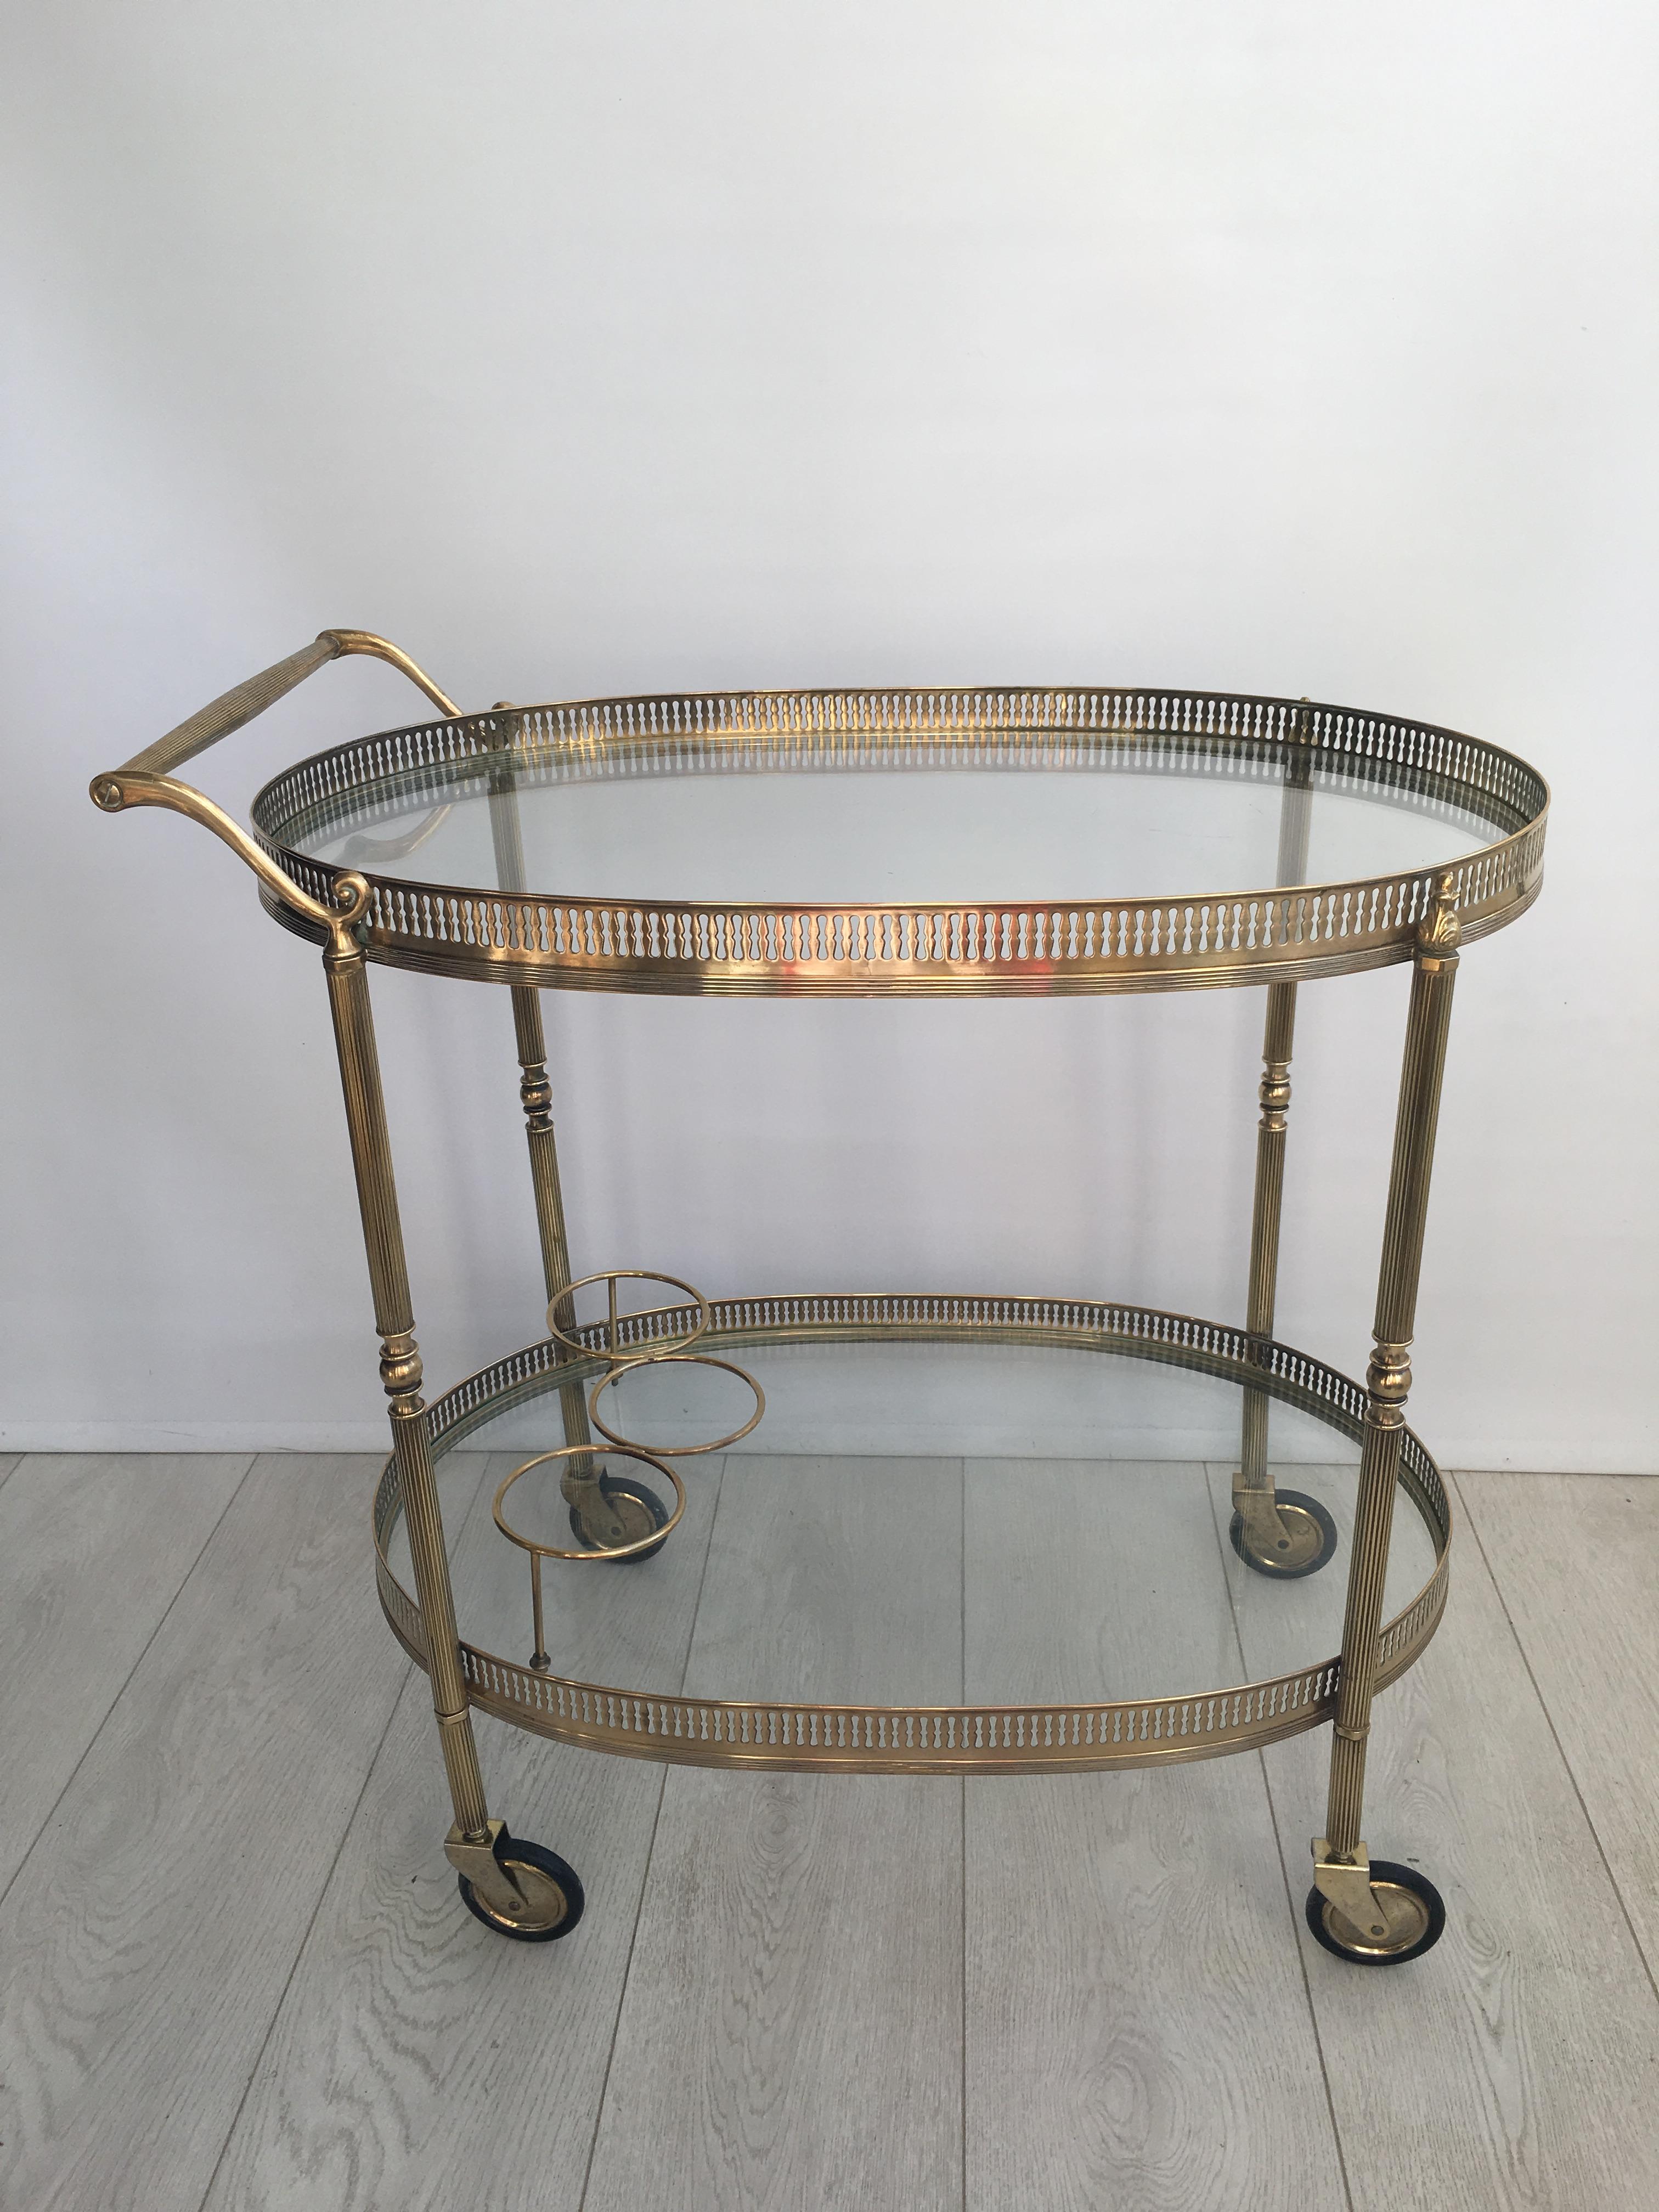 Hollywood Regency Vintage French Brass Oval Drinks Trolley or Bar Cart